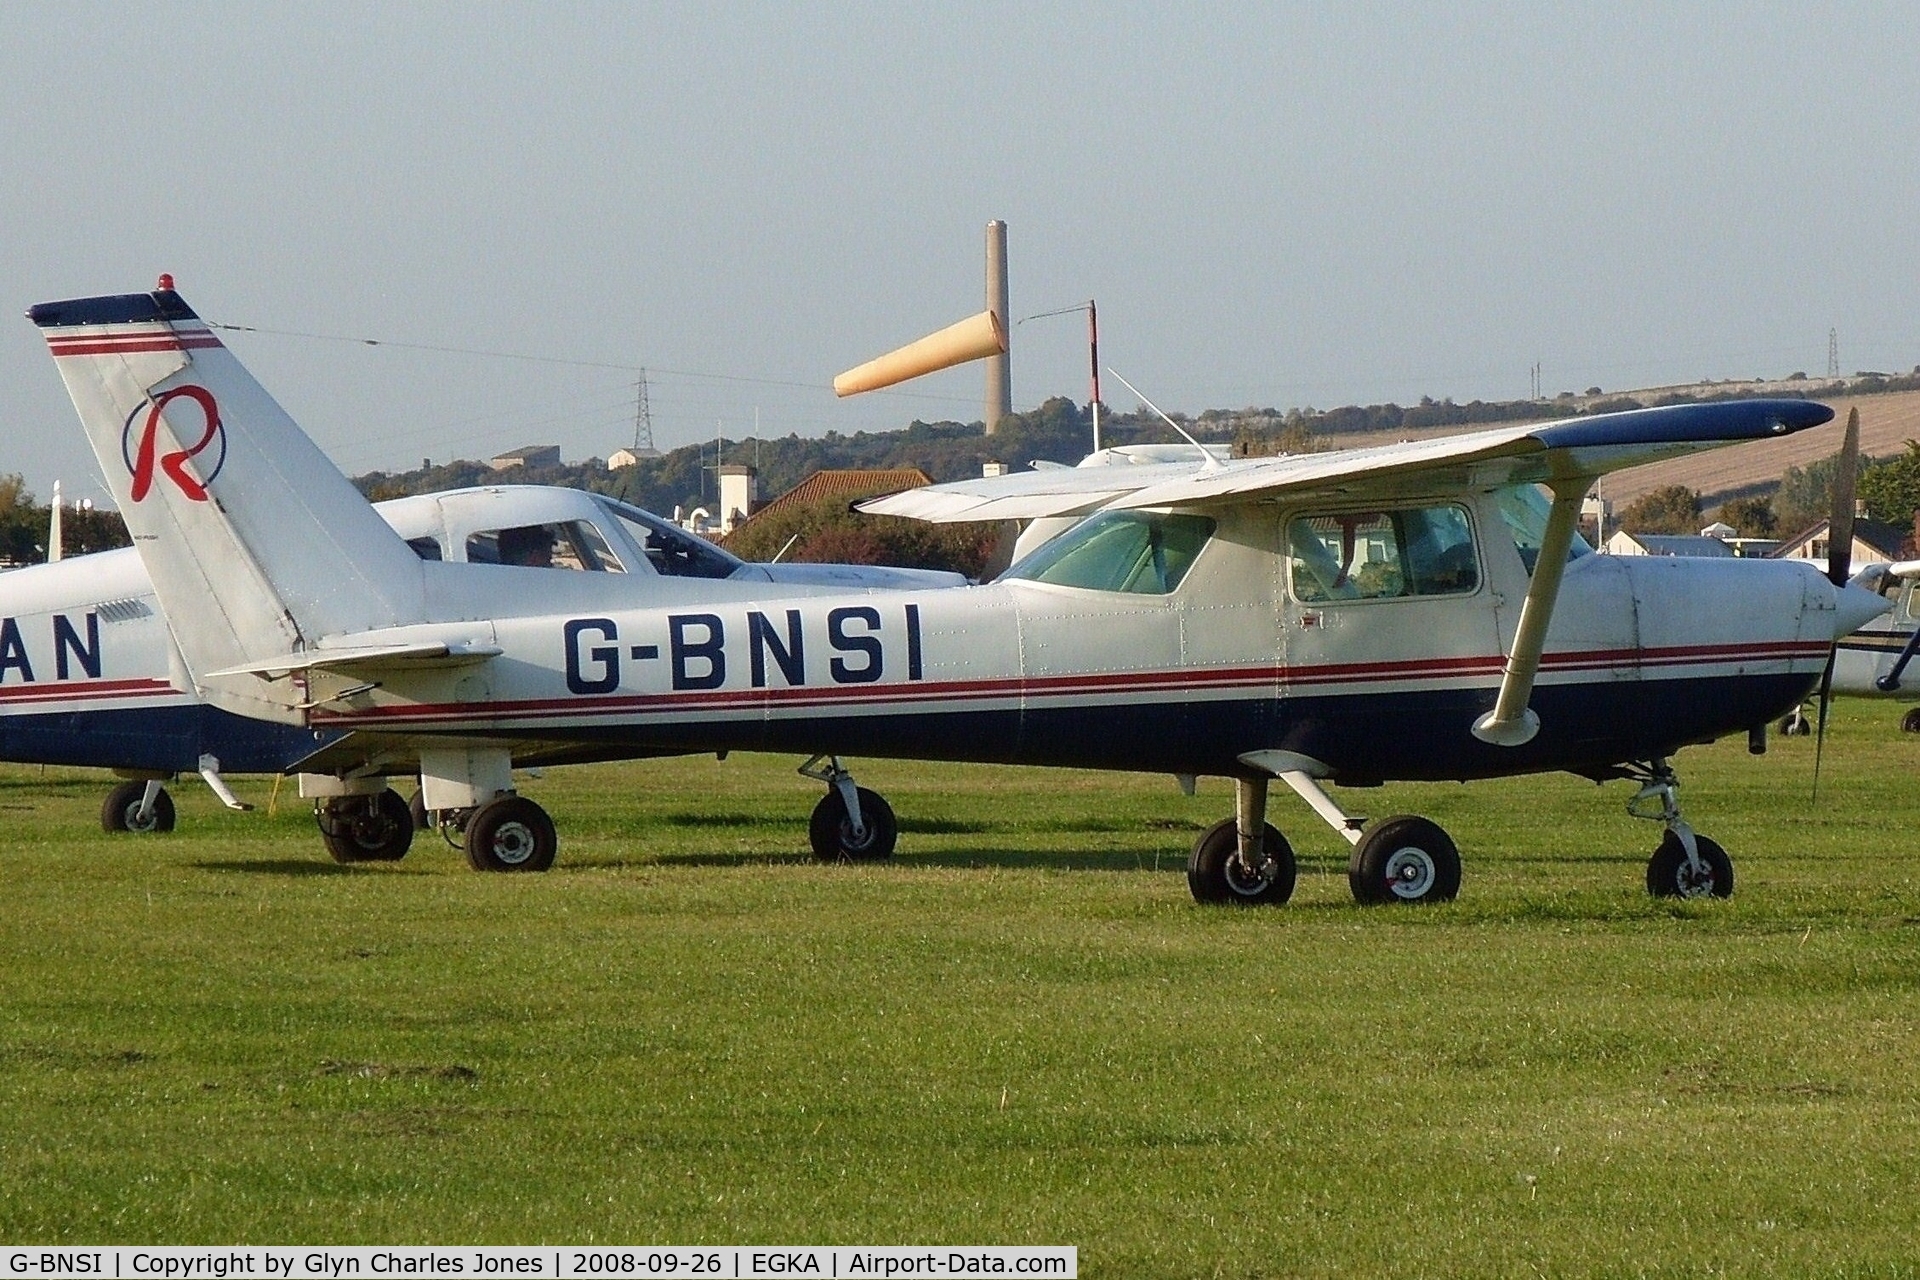 G-BNSI, 1981 Cessna 152 C/N 152-84853, Previously N4945P. Owned by Sky Leisure Aviation Charters Ltd. Operated by Redhill Aviation.